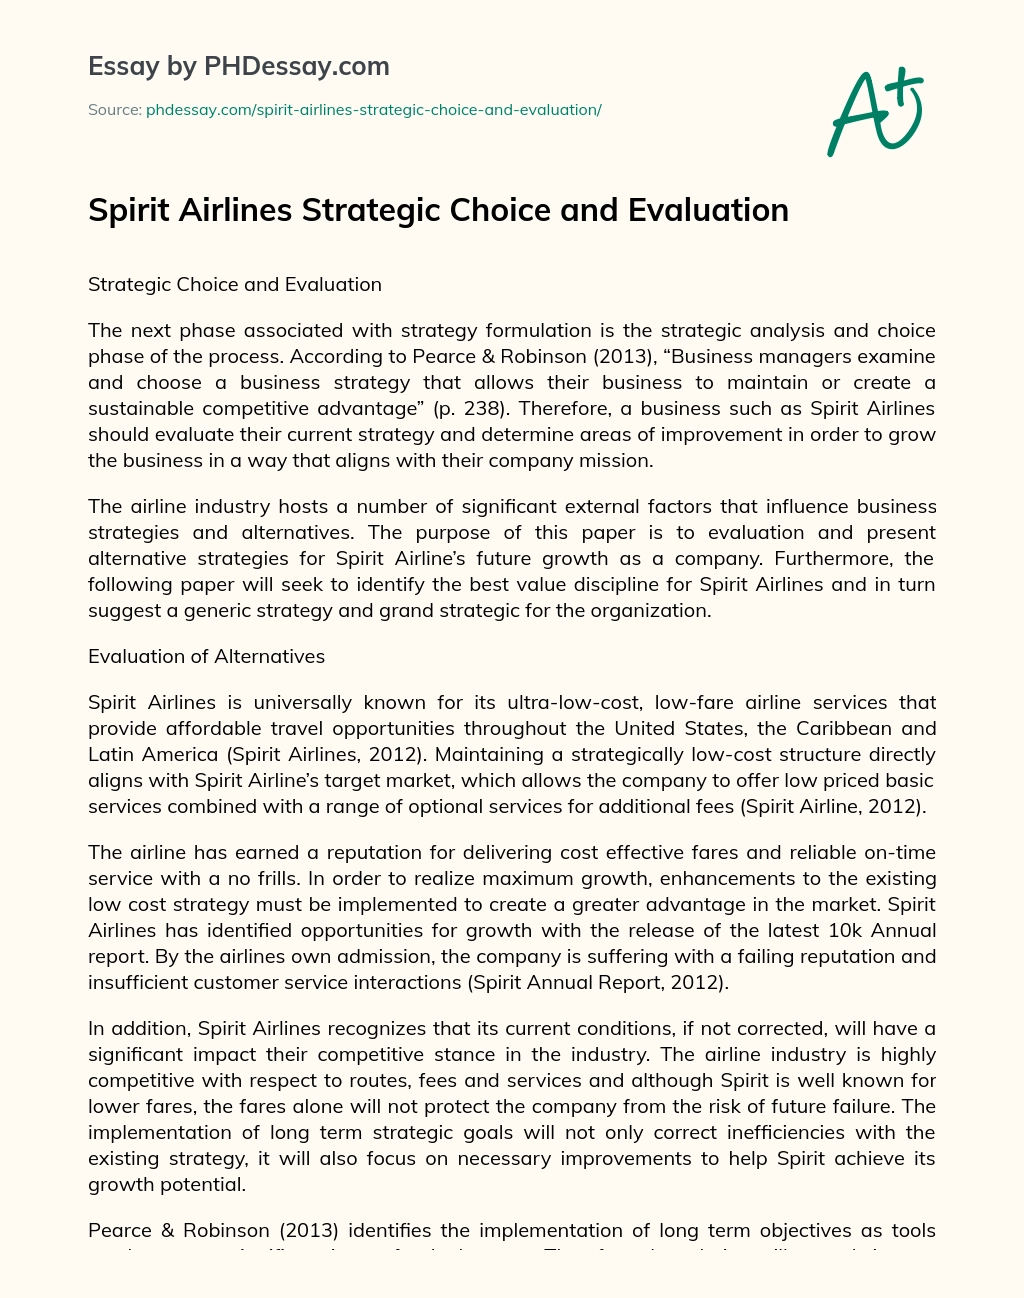 Spirit Airlines Strategic Choice and Evaluation essay